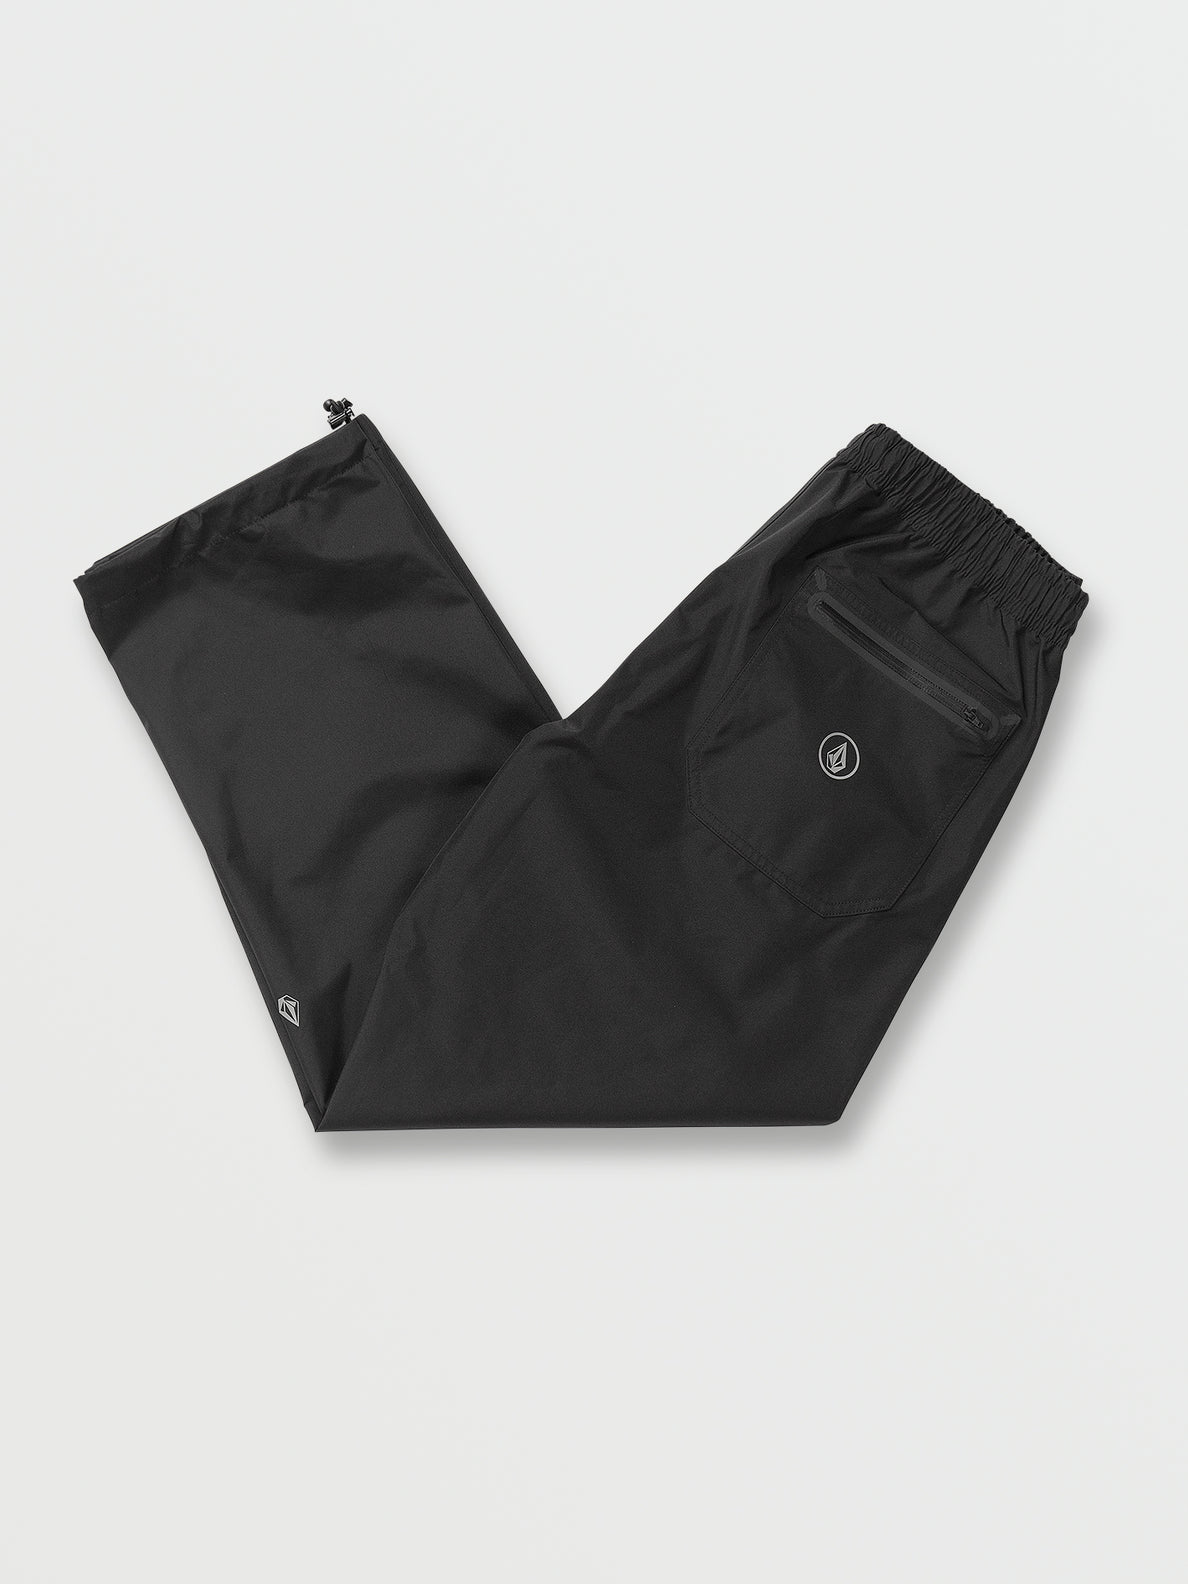 Outer Spaced Gore-Tex Pants - Black (A1232208_BLK) [02]